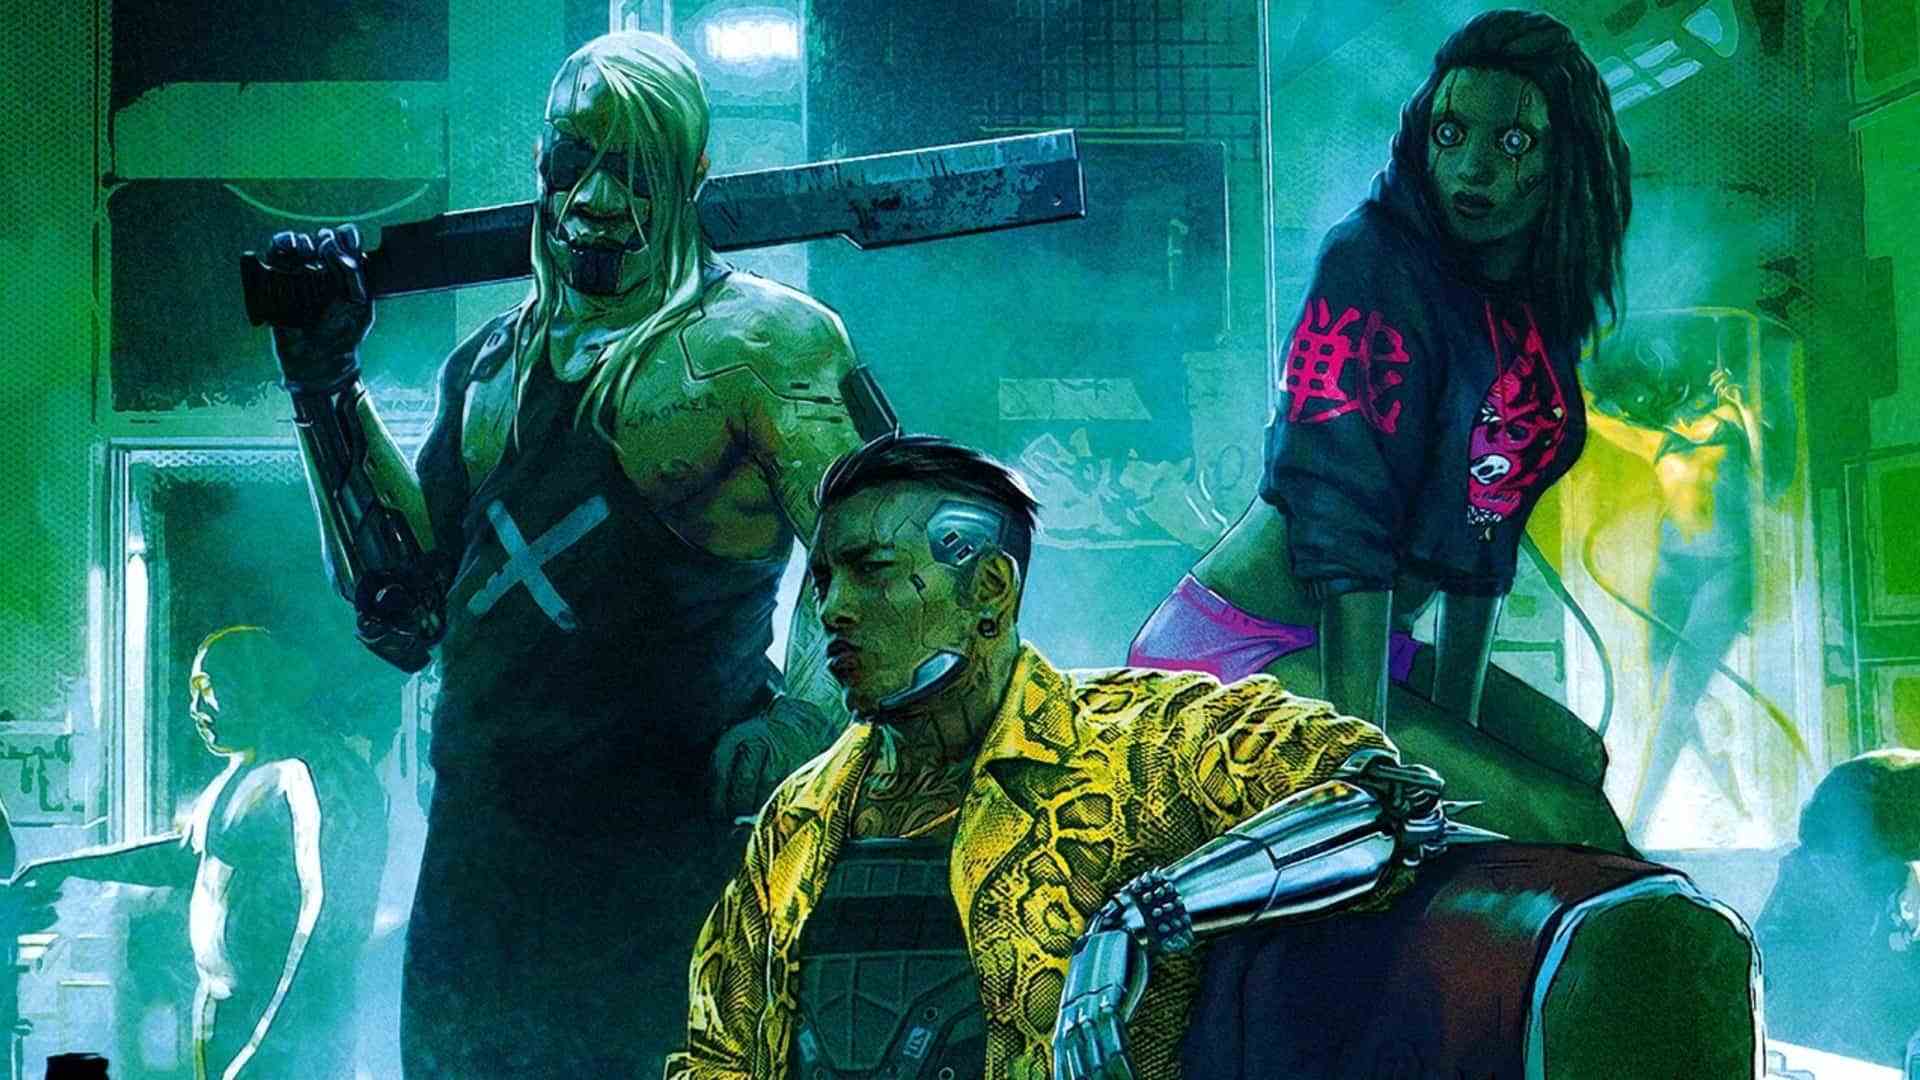 New Cyberpunk 2077 Video By PlayStation Focuses On The Game's